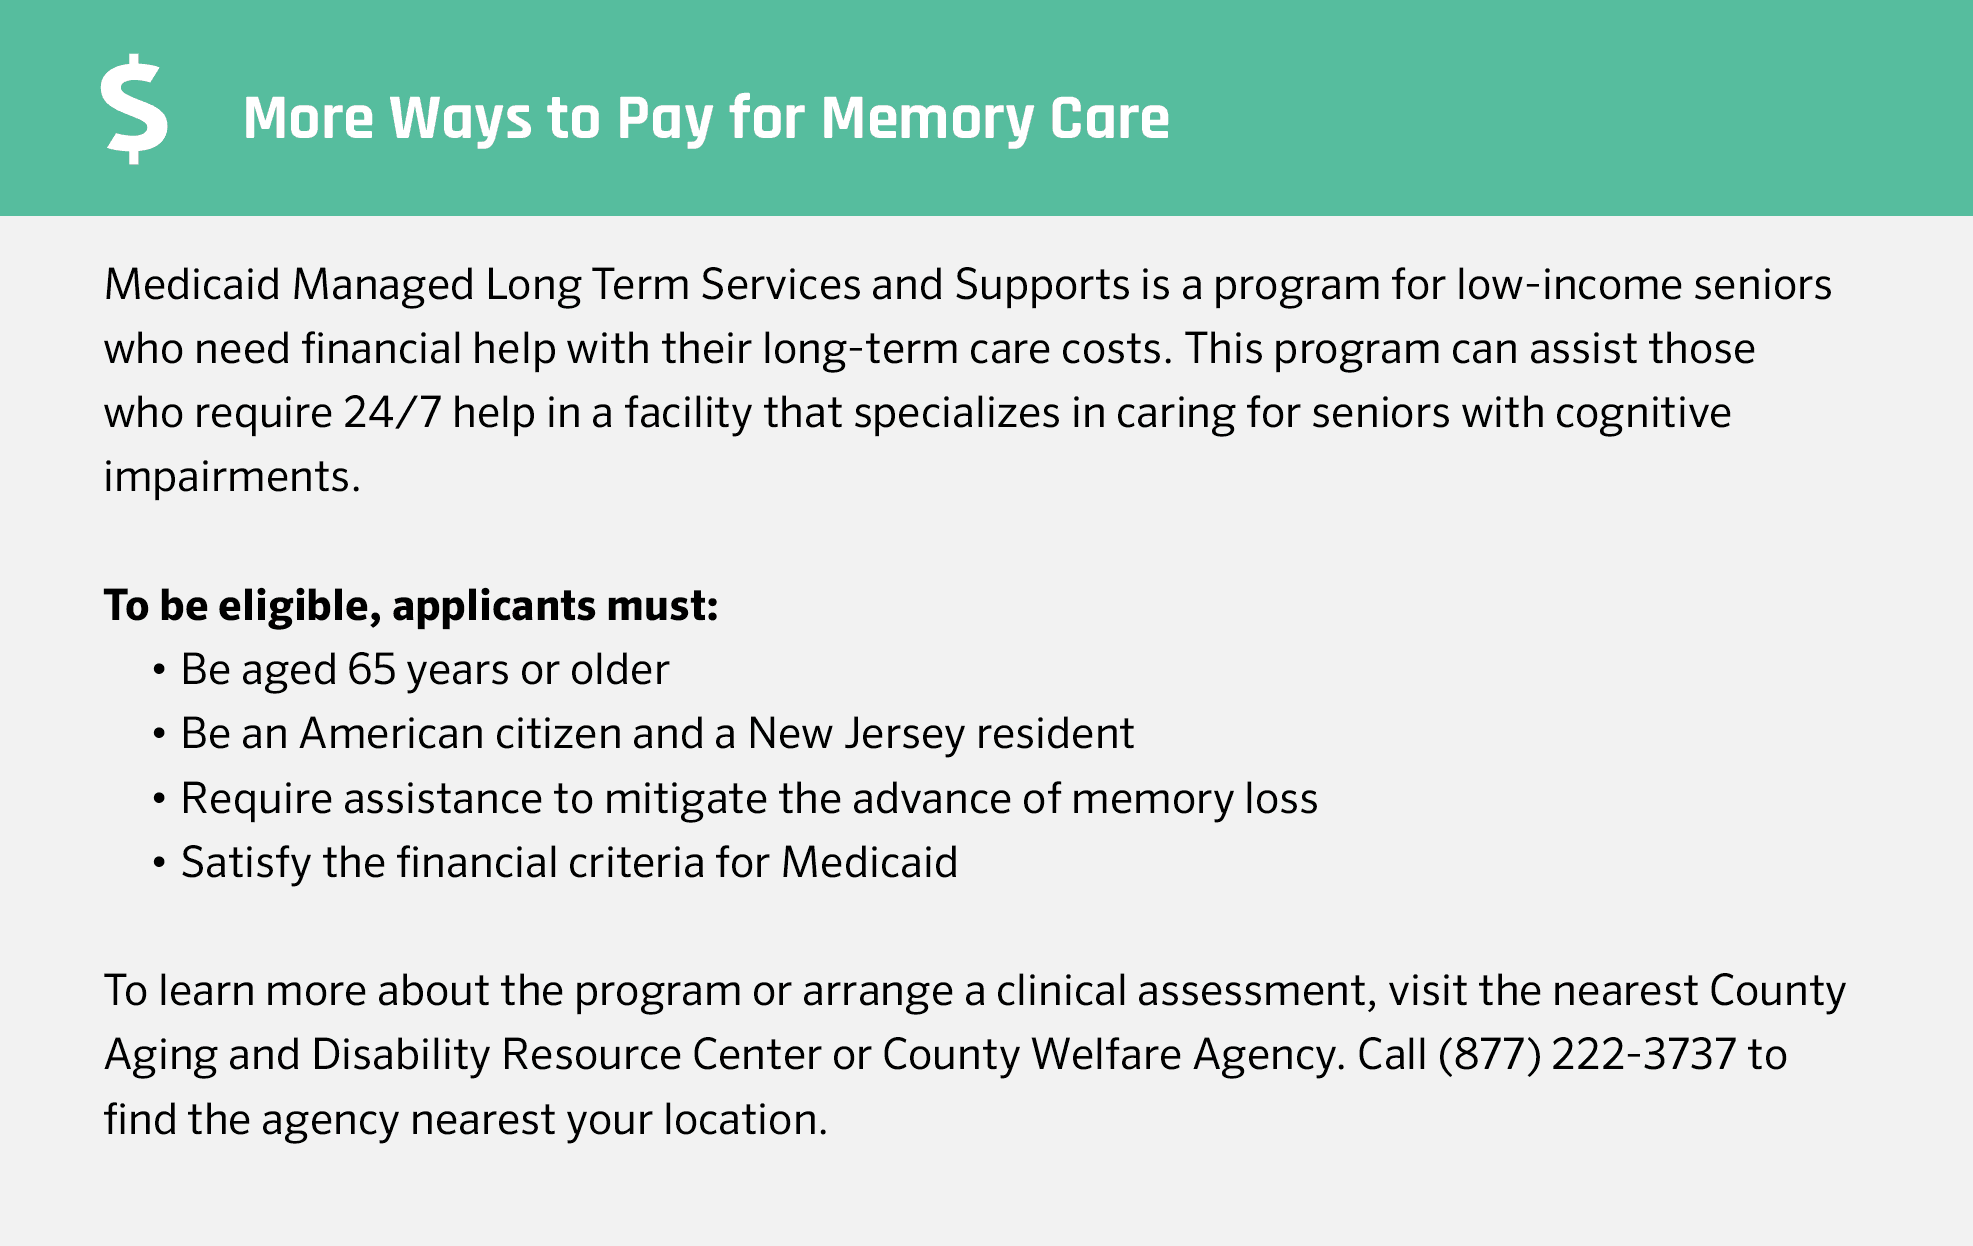 More ways to pay for memory care in New Jersey